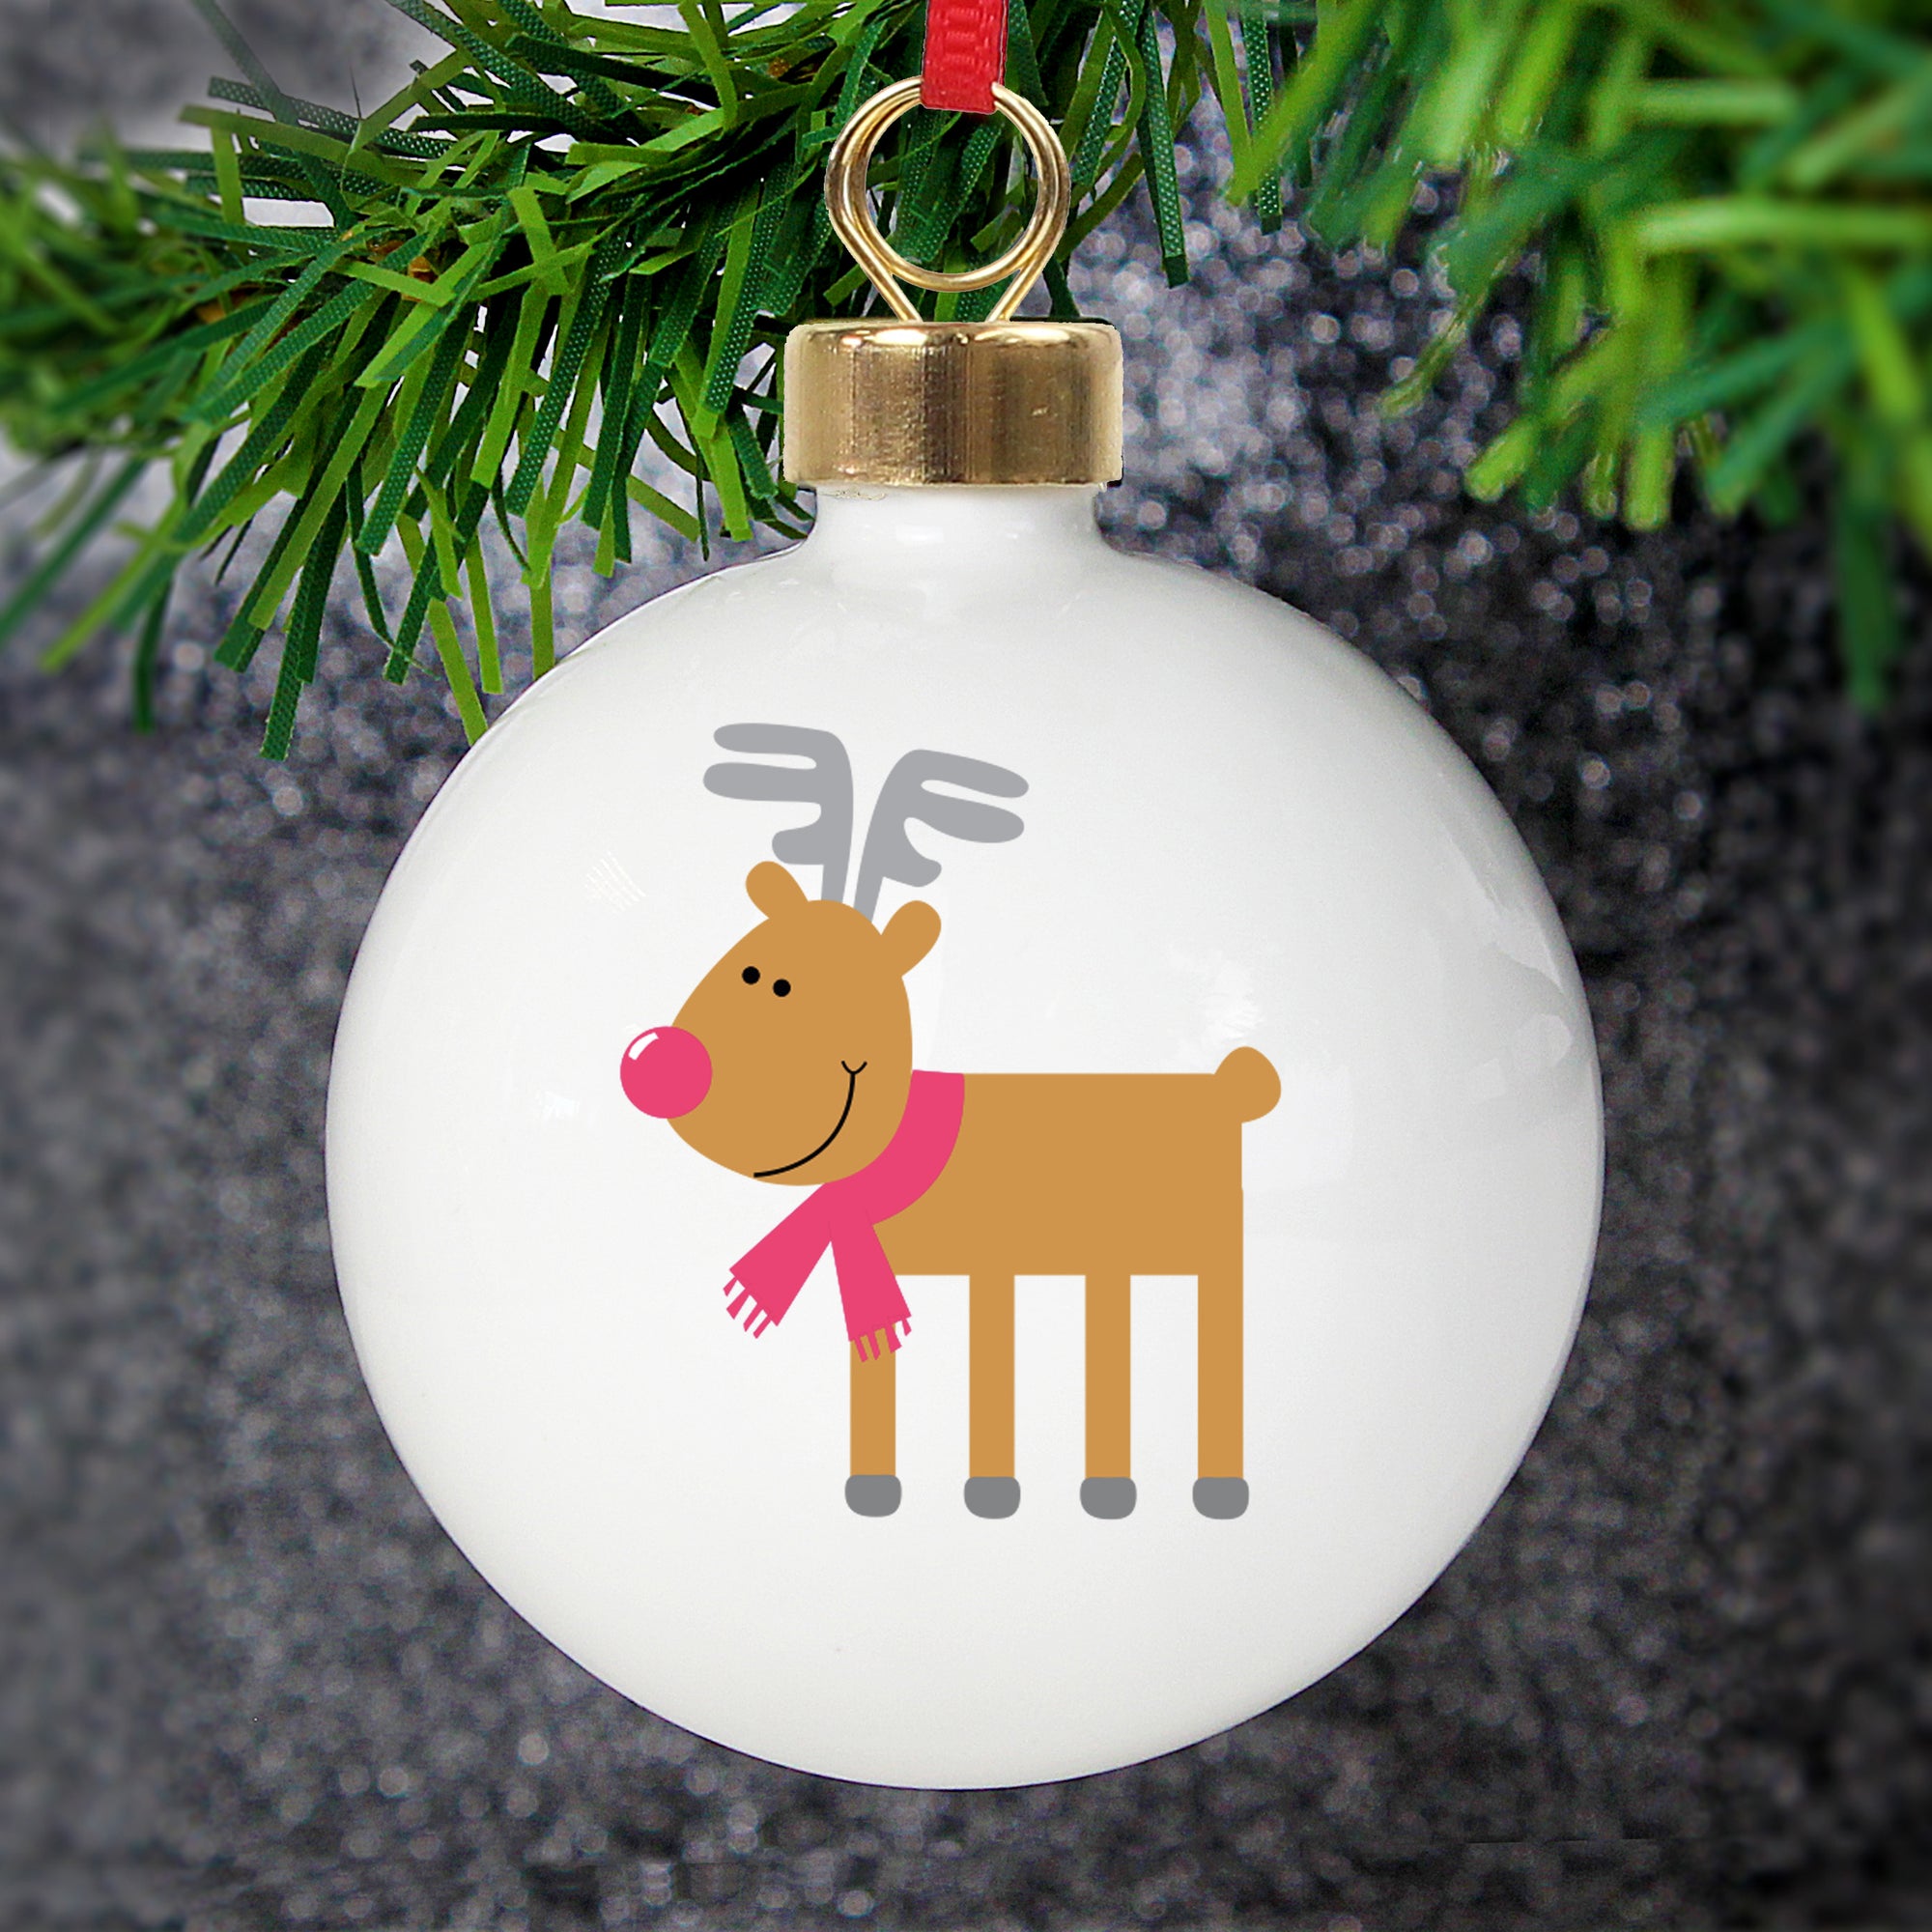 Personalised round Christmas tree bauble featuring a cartoon drawing of Rudolph the Red Nose Reindeer on the front.  Made from white glazed ceramic, the rear of the bauble can be personalised with your own message over 4 lines.